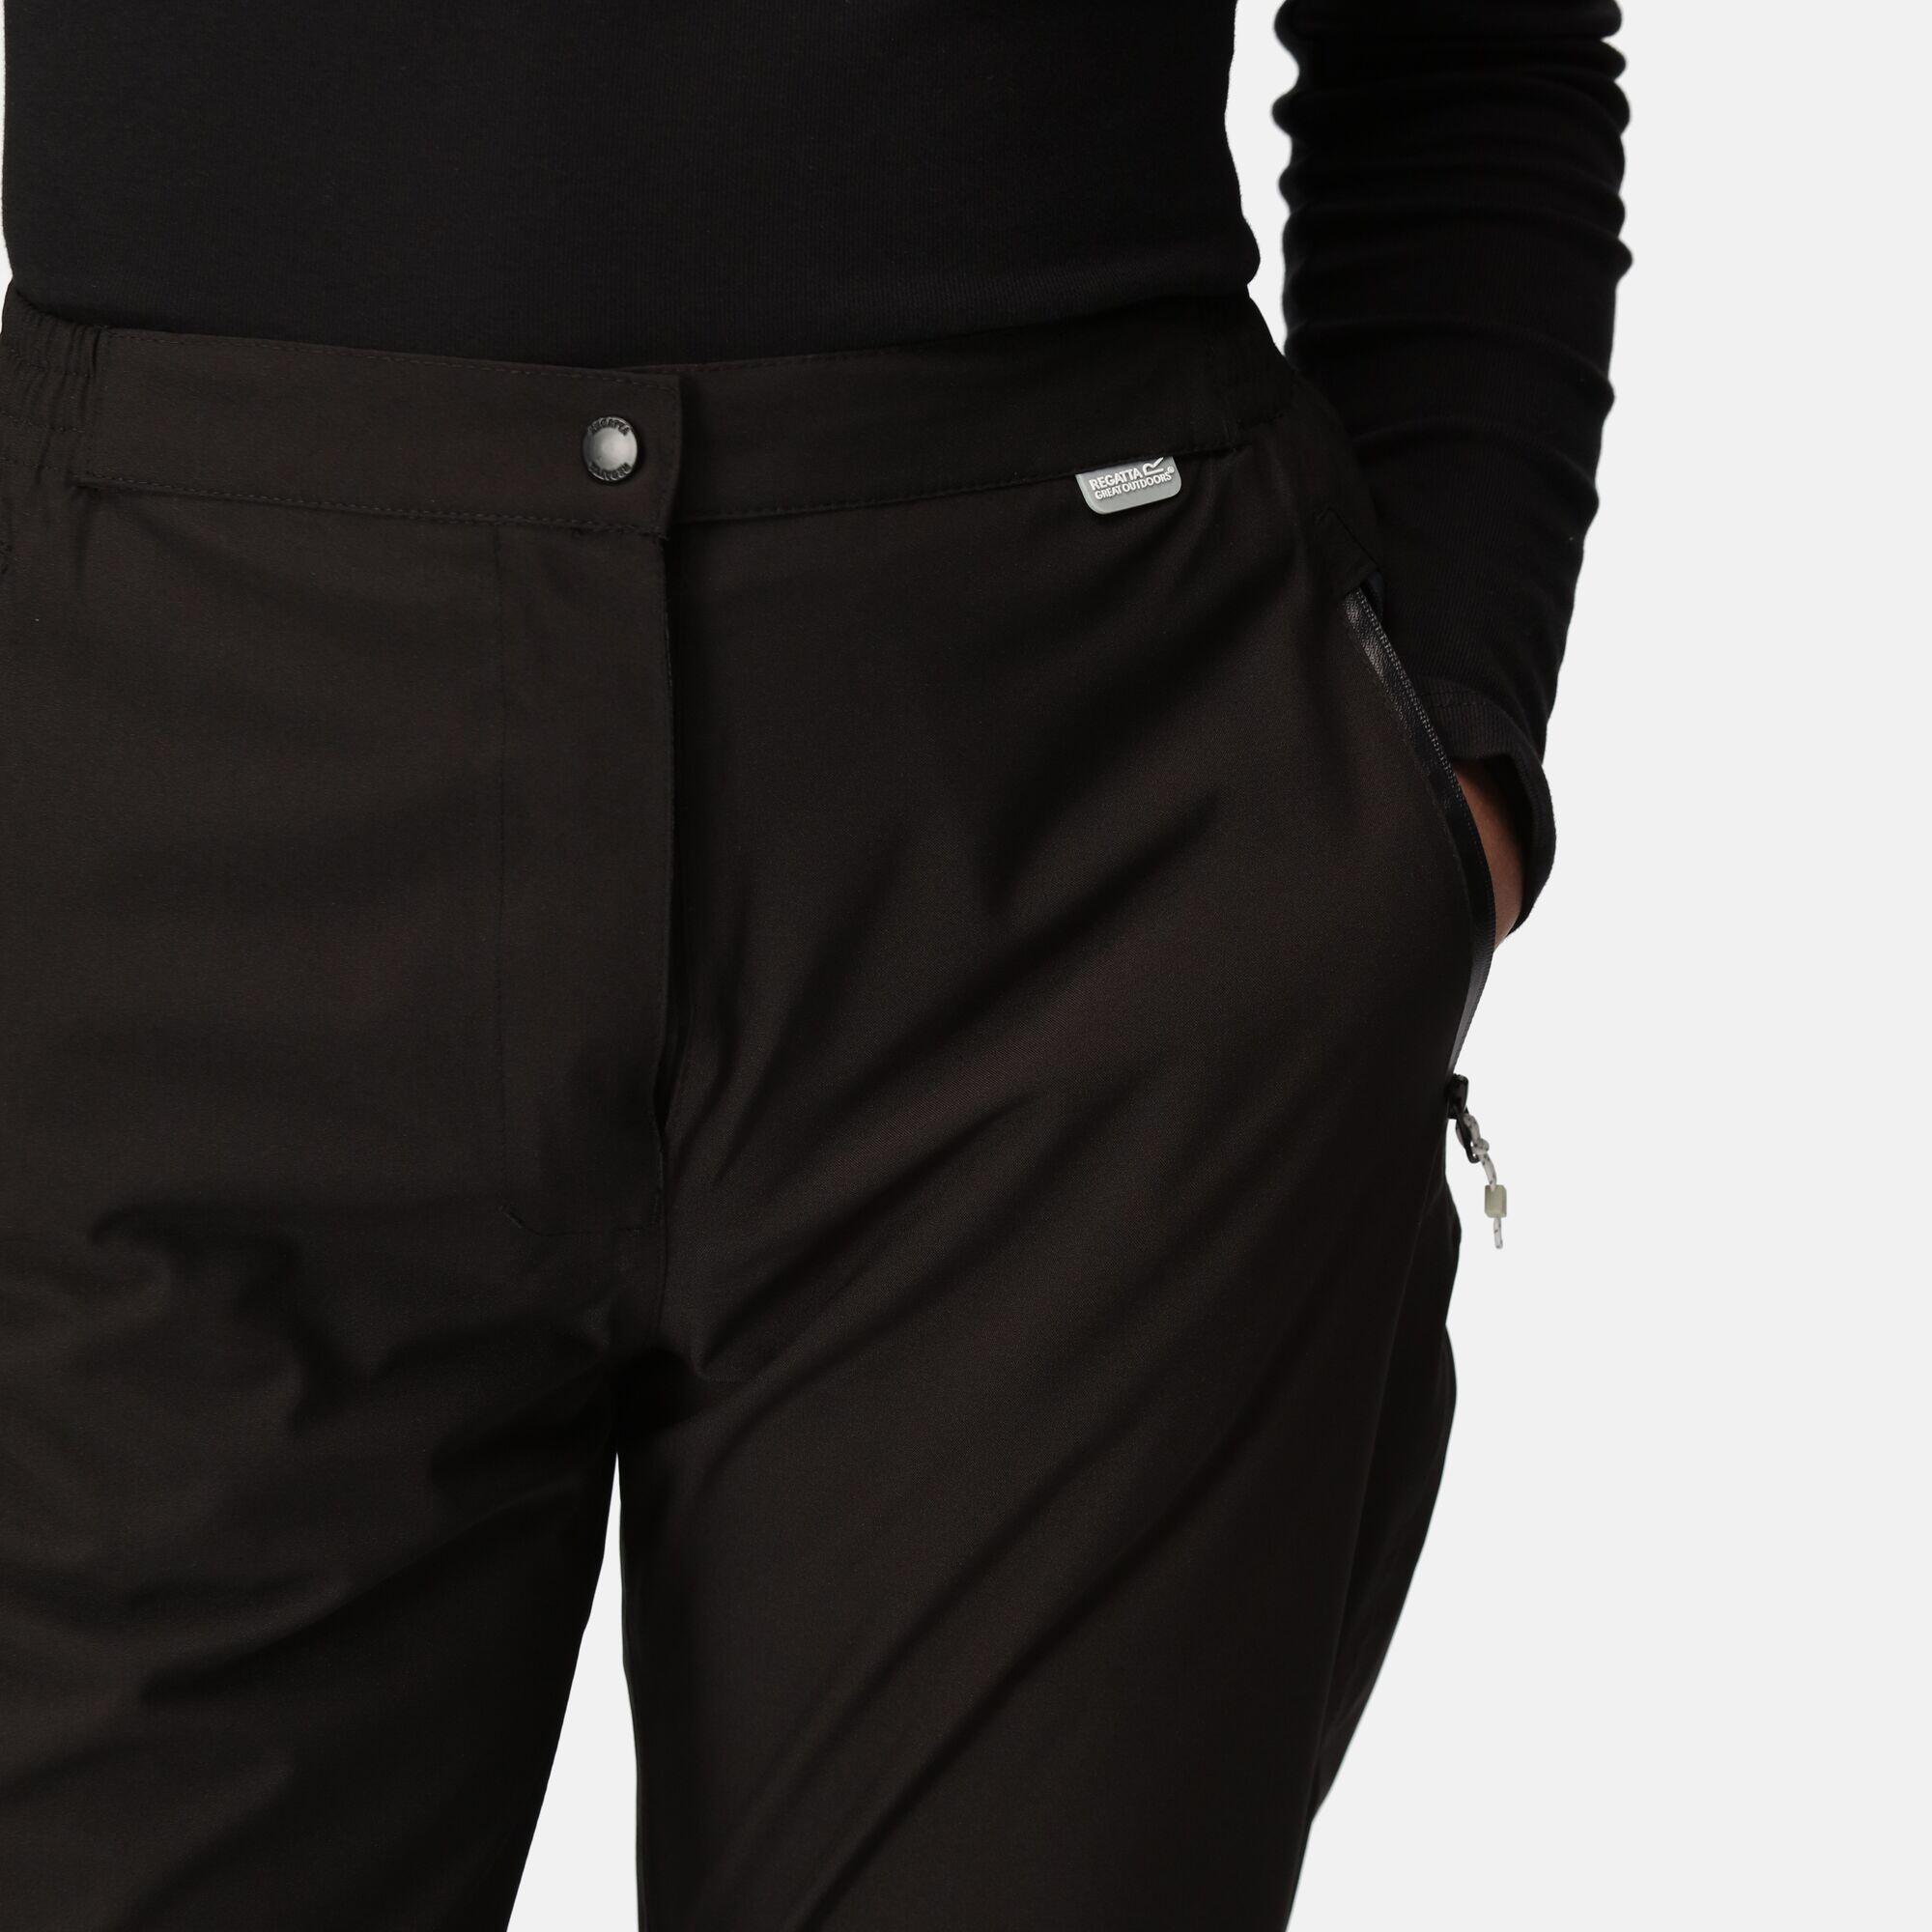 Highton Stretch Women's Hiking Overtrousers - Black 4/5